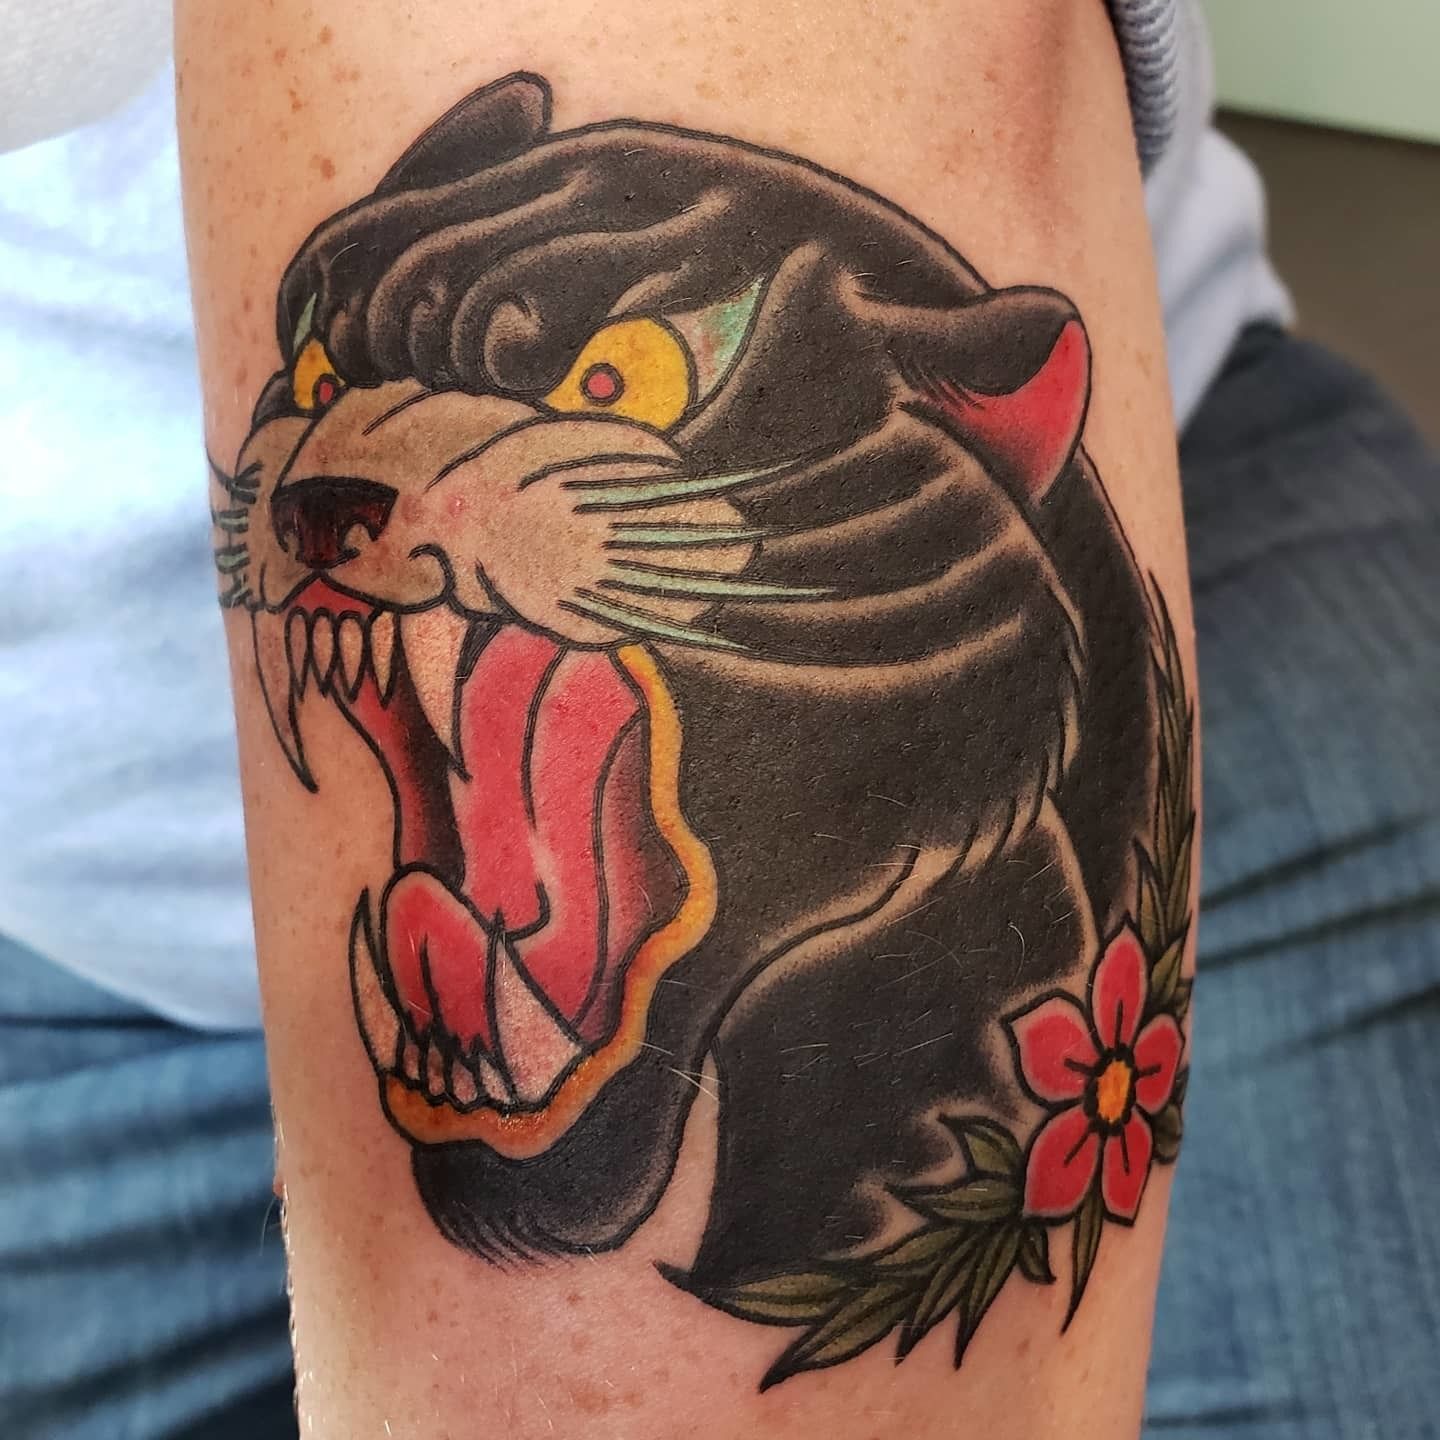 Black Panther Head Tattoo On Left Hand